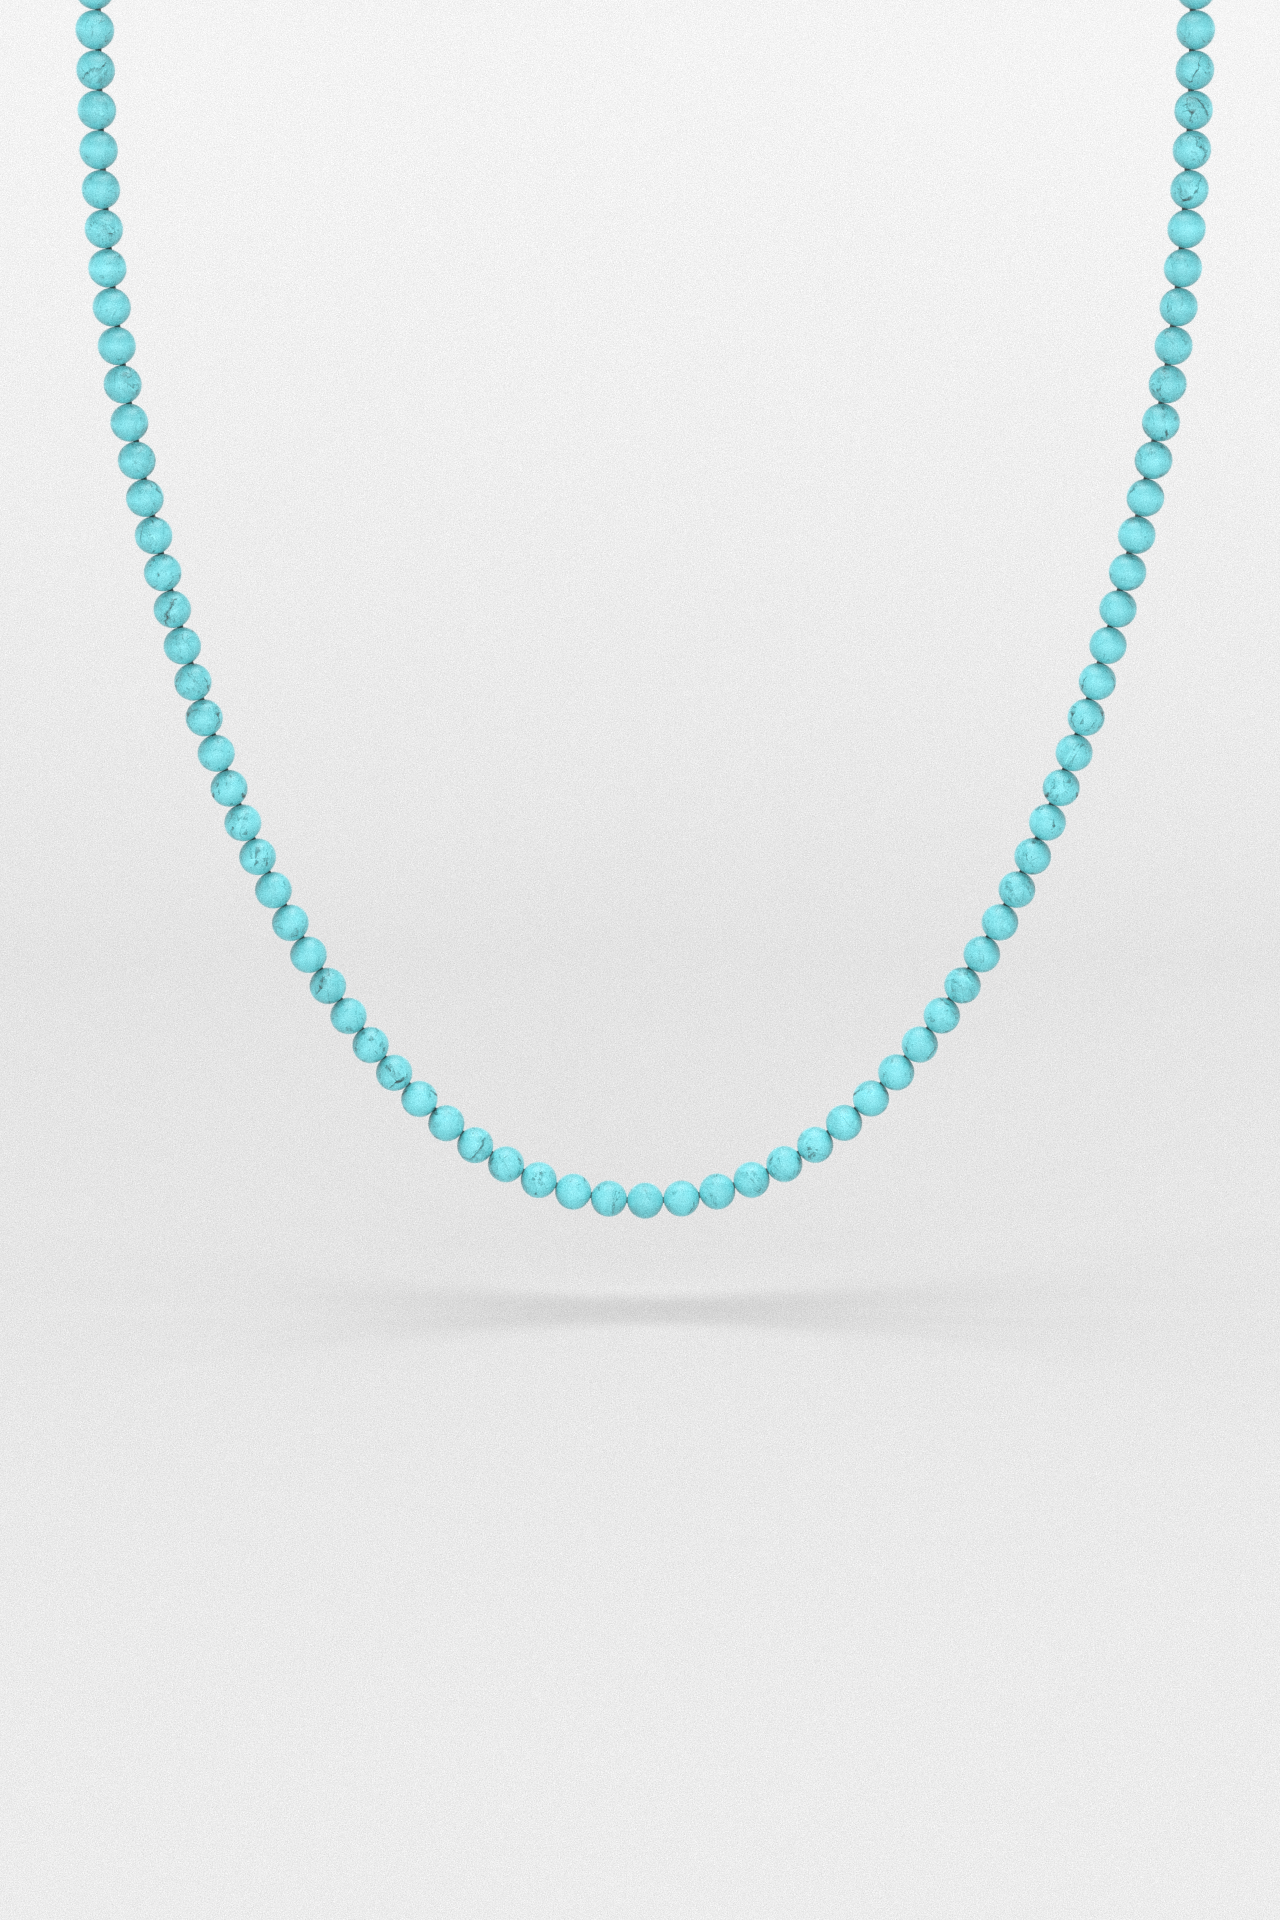 Turquoise Necklace 6mm | AEON